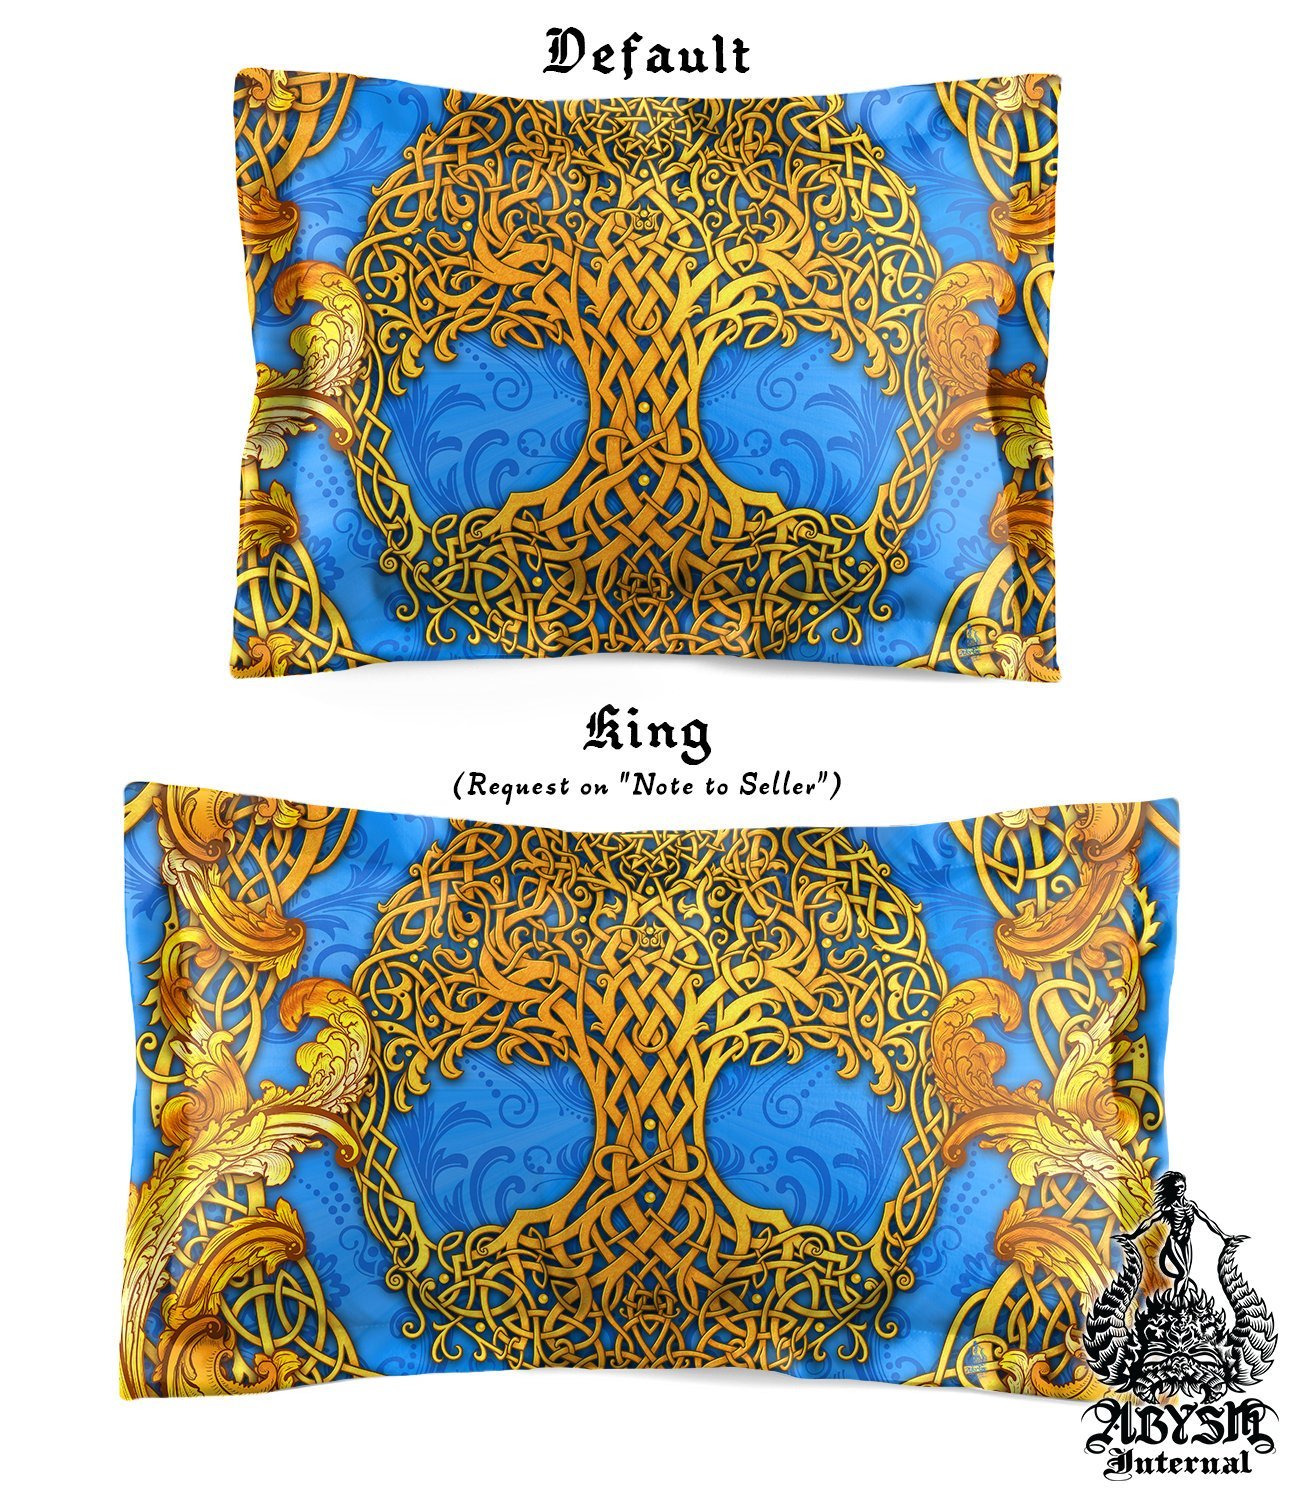 Tree of Life Bedding Set, Comforter and Duvet, Indie Bed Cover, Witchy Bedroom Decor King, Queen and Twin Size - Celtic, Vintage Ornament, Cyan and Gold - Abysm Internal